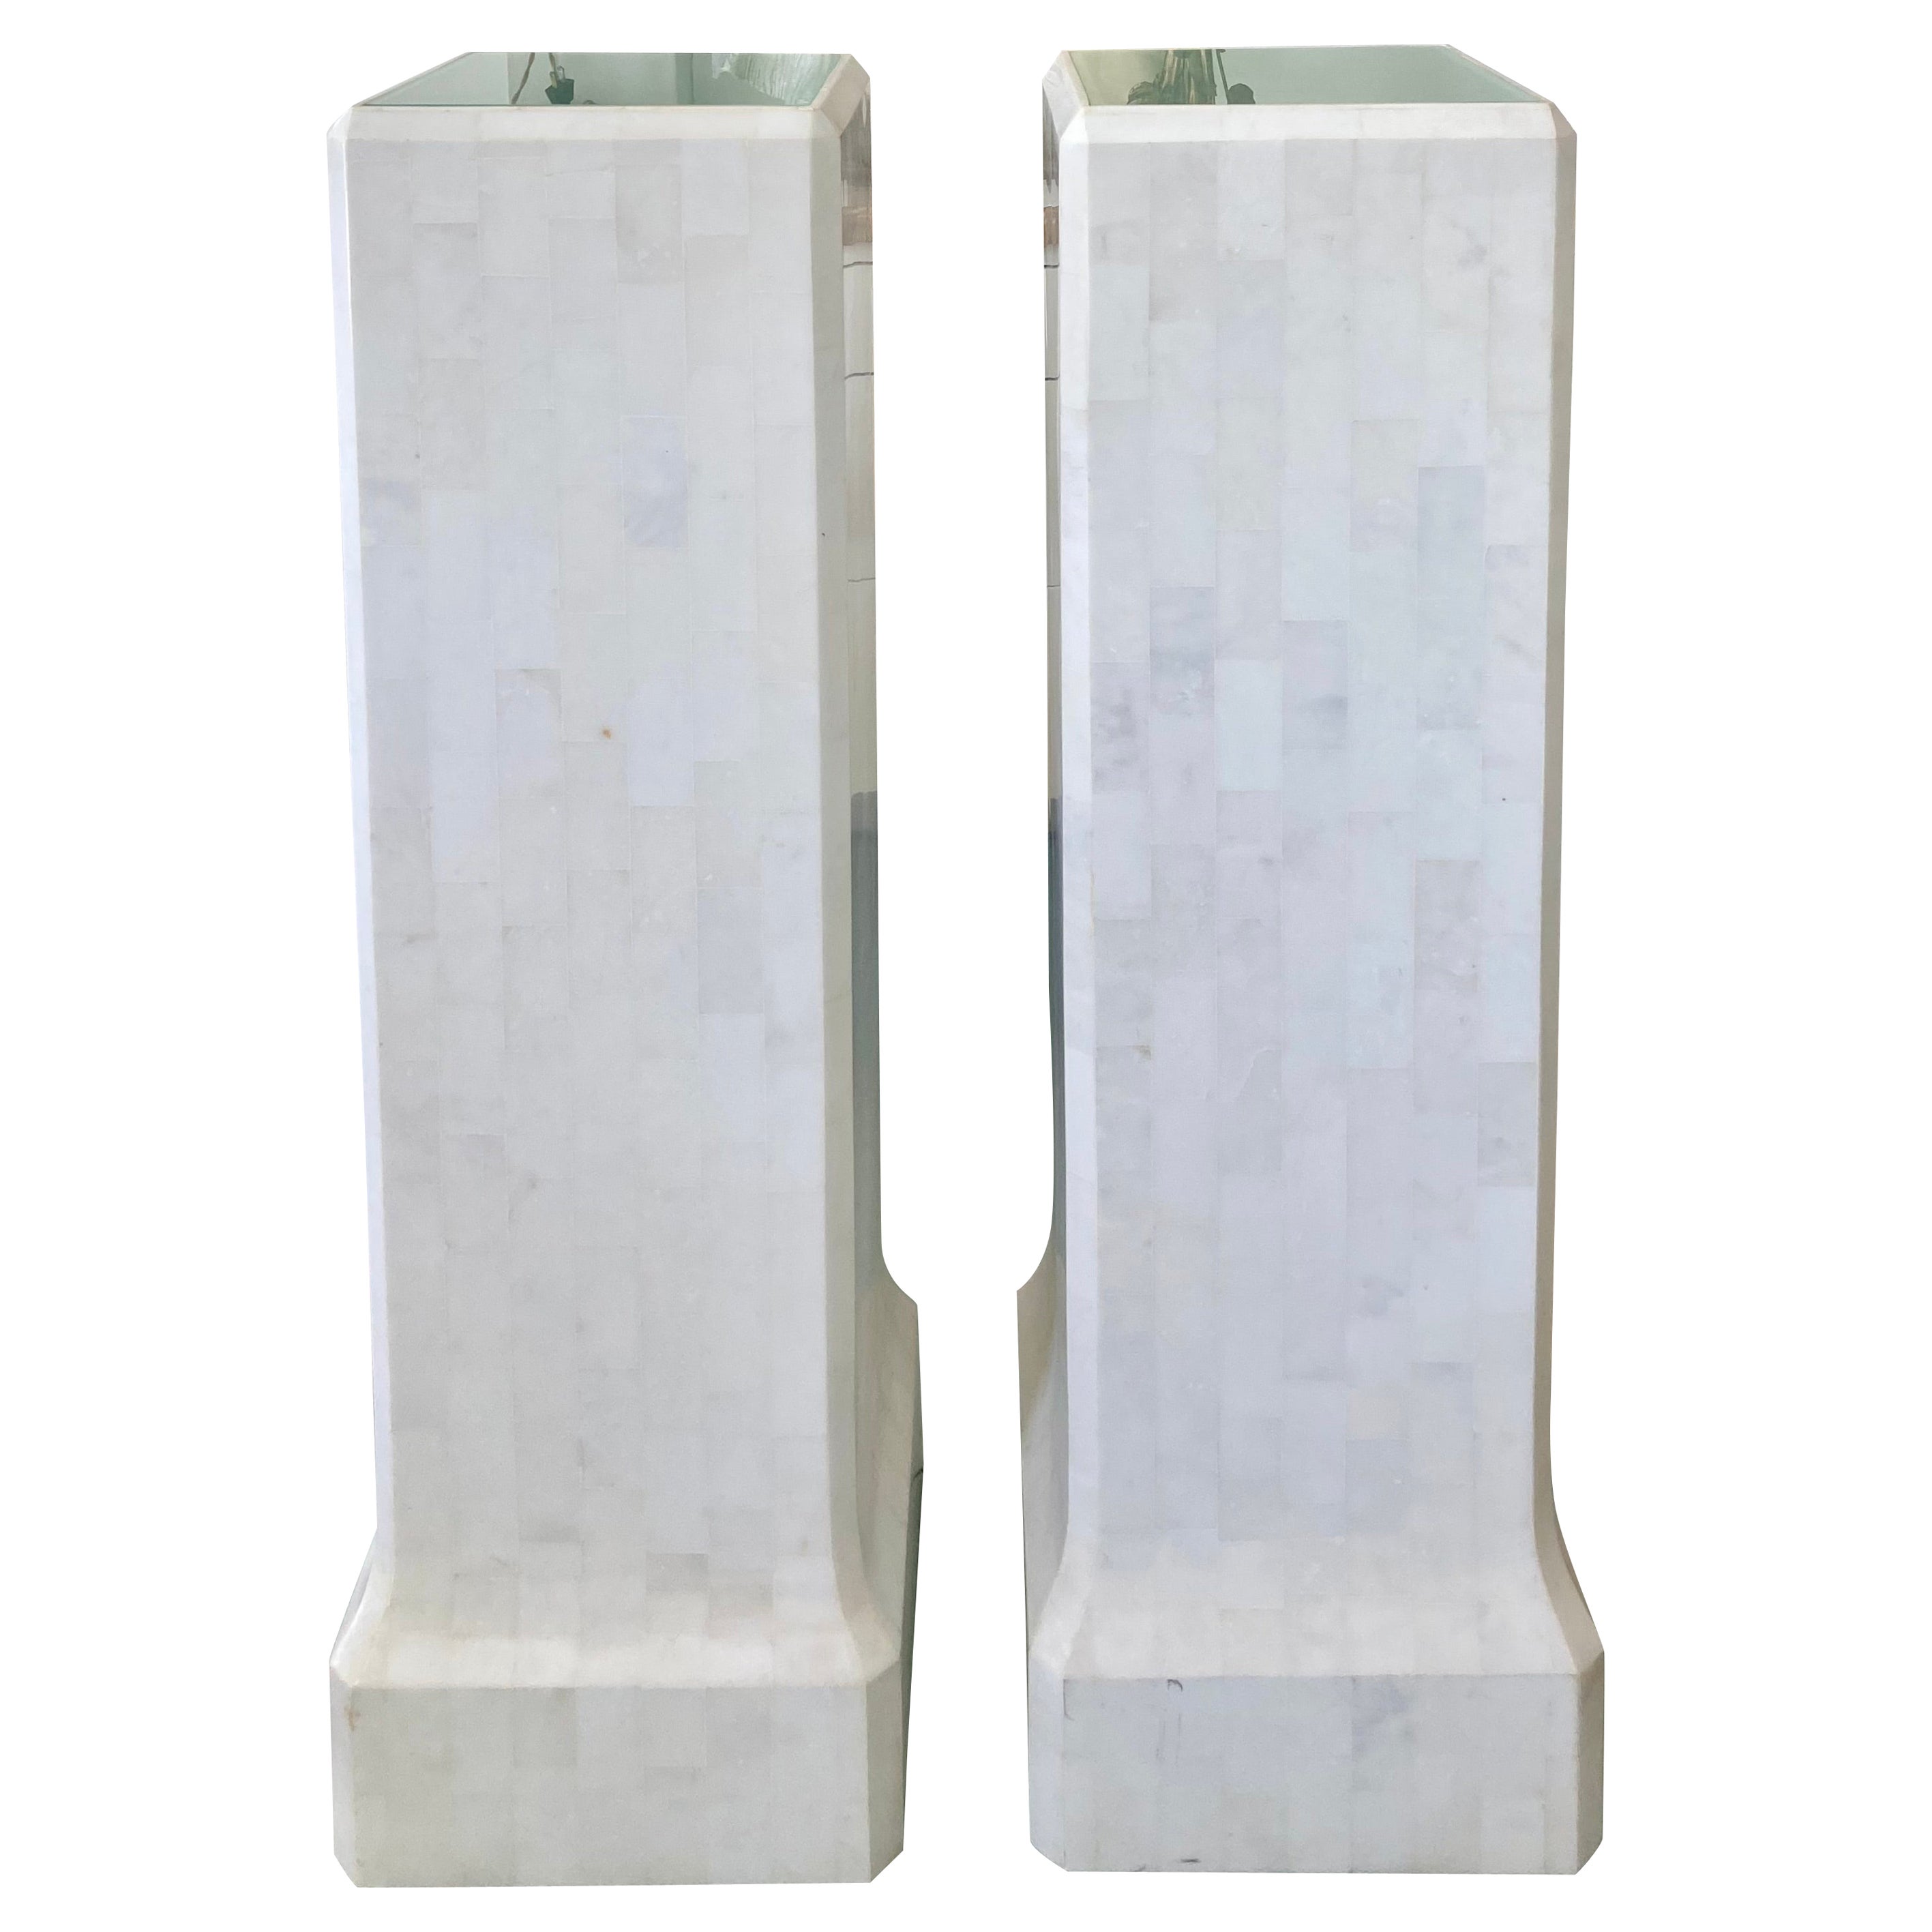 Tessellated White Marble Pedestals With Lighted Surfaces, a Pair For Sale